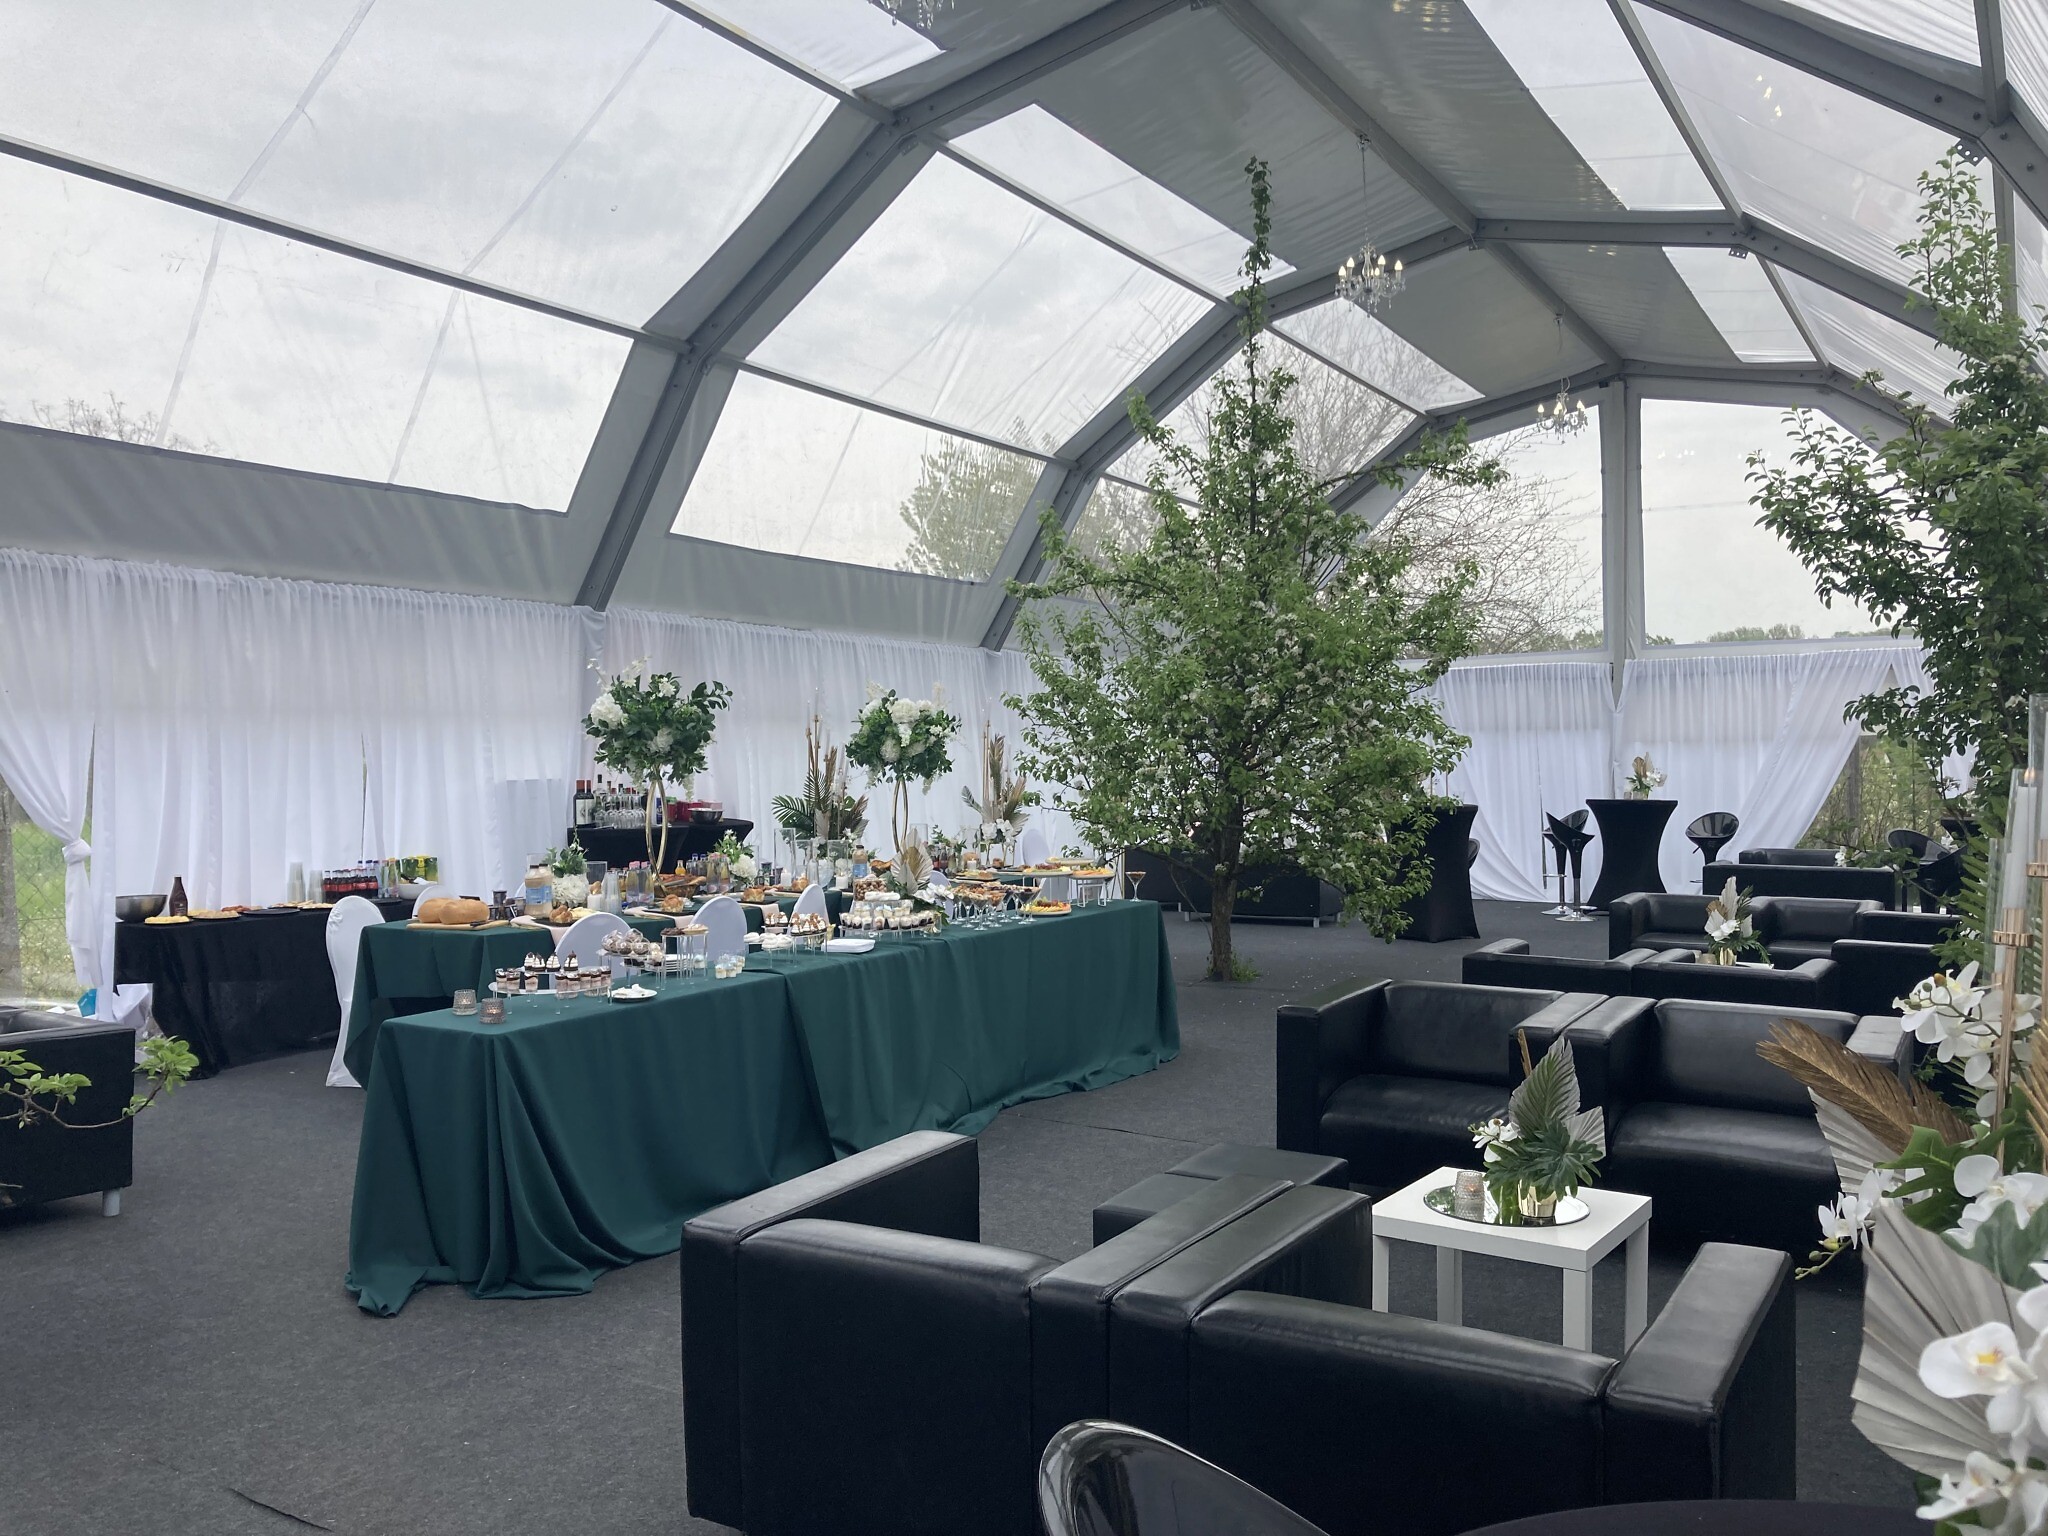 A VIP dining tent for major donors at the annual pilgrimage to the gravesite of 'Wonder Rabbi' Yeshaya Steiner in Bodrogkeresztur, Hungary, April 24, 2023. (Yaakov Schwartz/ Times of Israel)